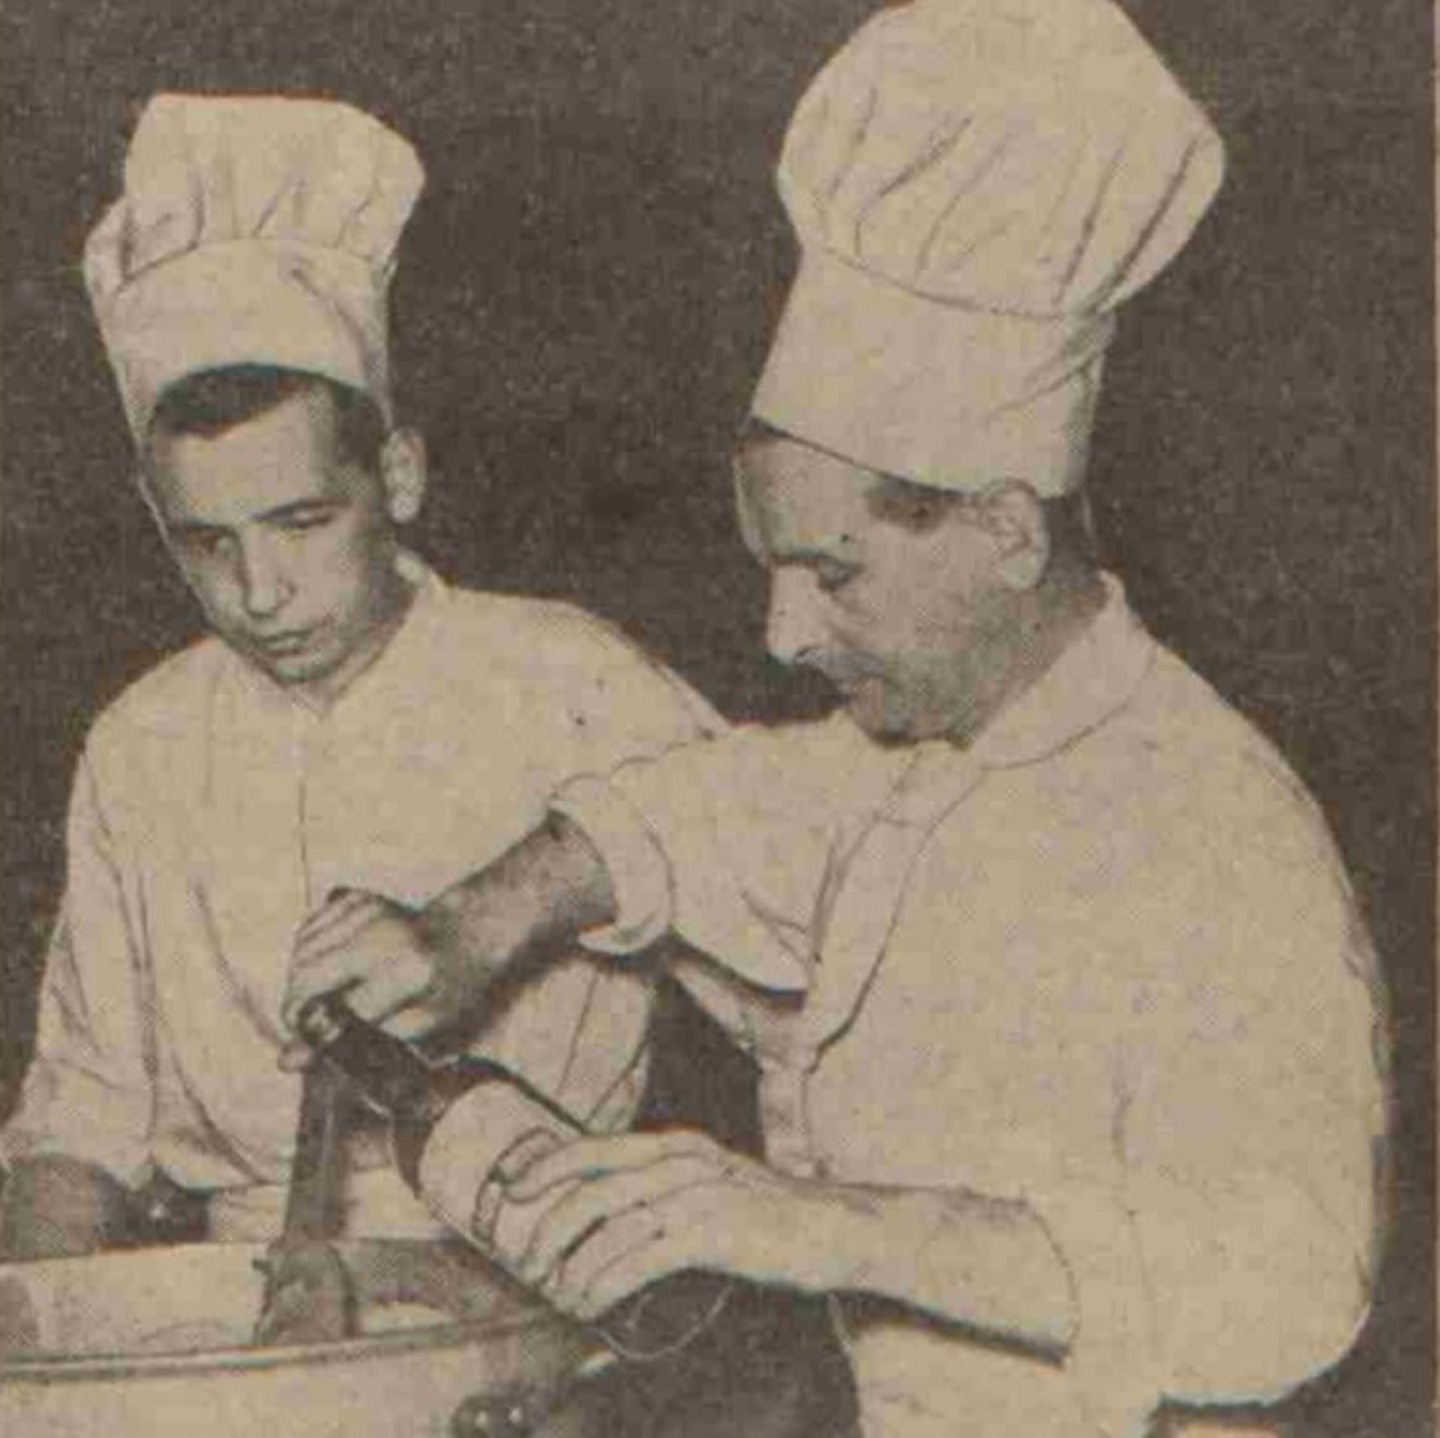 The Café's chef Mr Phillip Rush with his assistant. 1948.